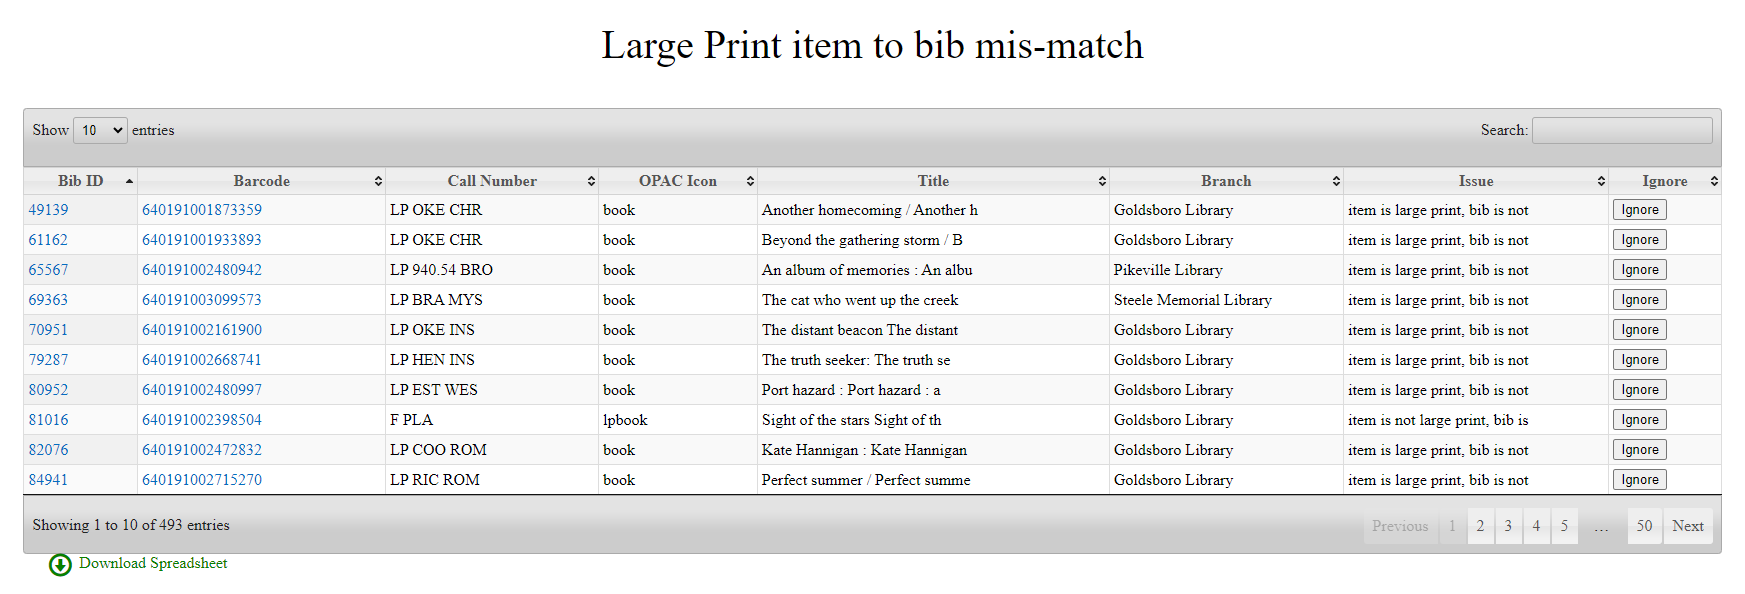 Example list of Large Print item to bib mis-matches